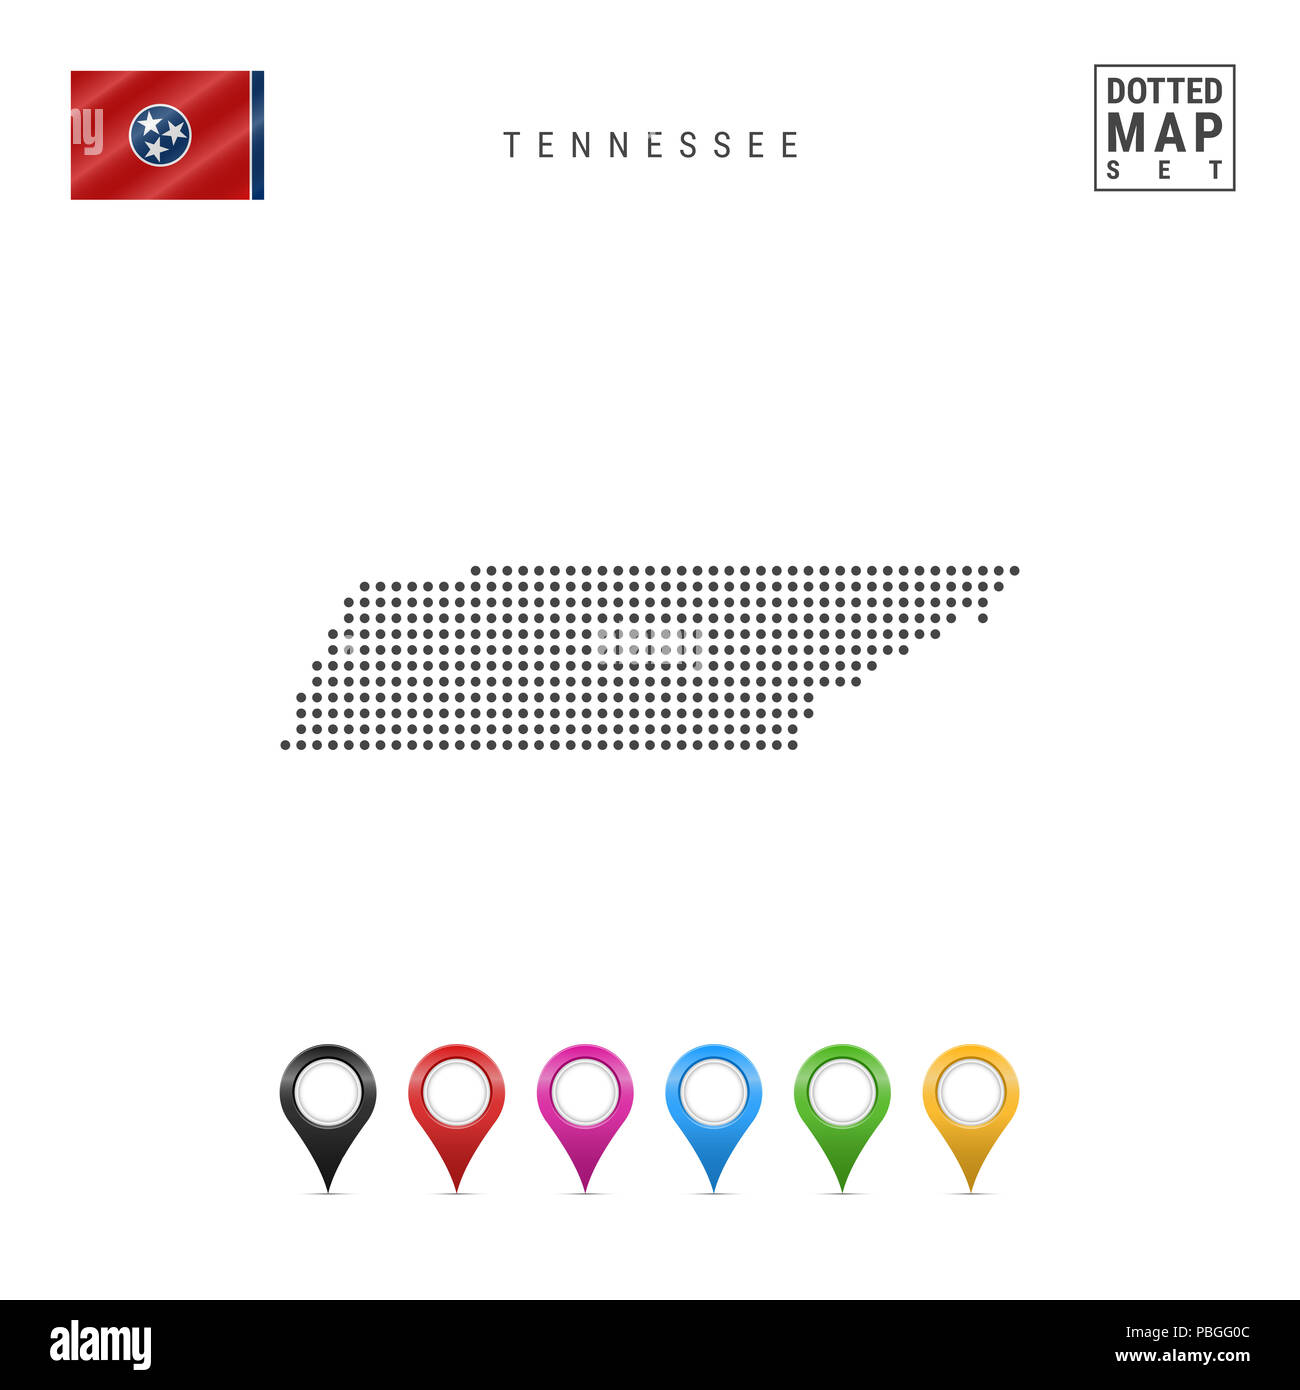 Dots Pattern Map of Tennessee. Stylized Simple Silhouette of Tennessee. The Flag of the State of Tennessee. Set of Multicolored Map Markers. Illustrat Stock Photo